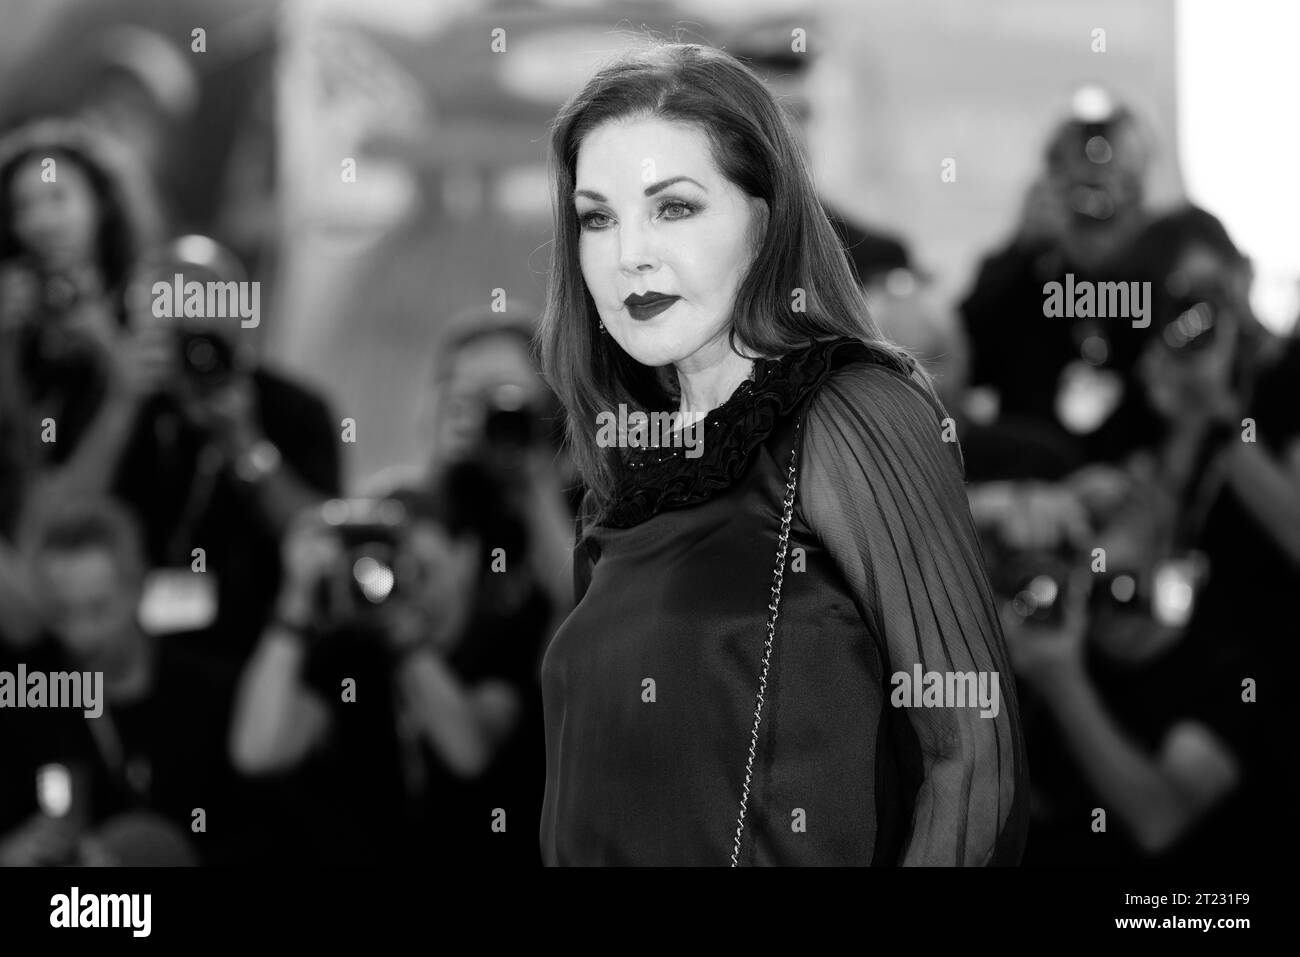 VENICE, ITALY - SEPTEMBER 04: Priscilla Presley attends the red carpet for the movie 'Priscilla' at the 80th Venice International Film Festival on Sep Stock Photo